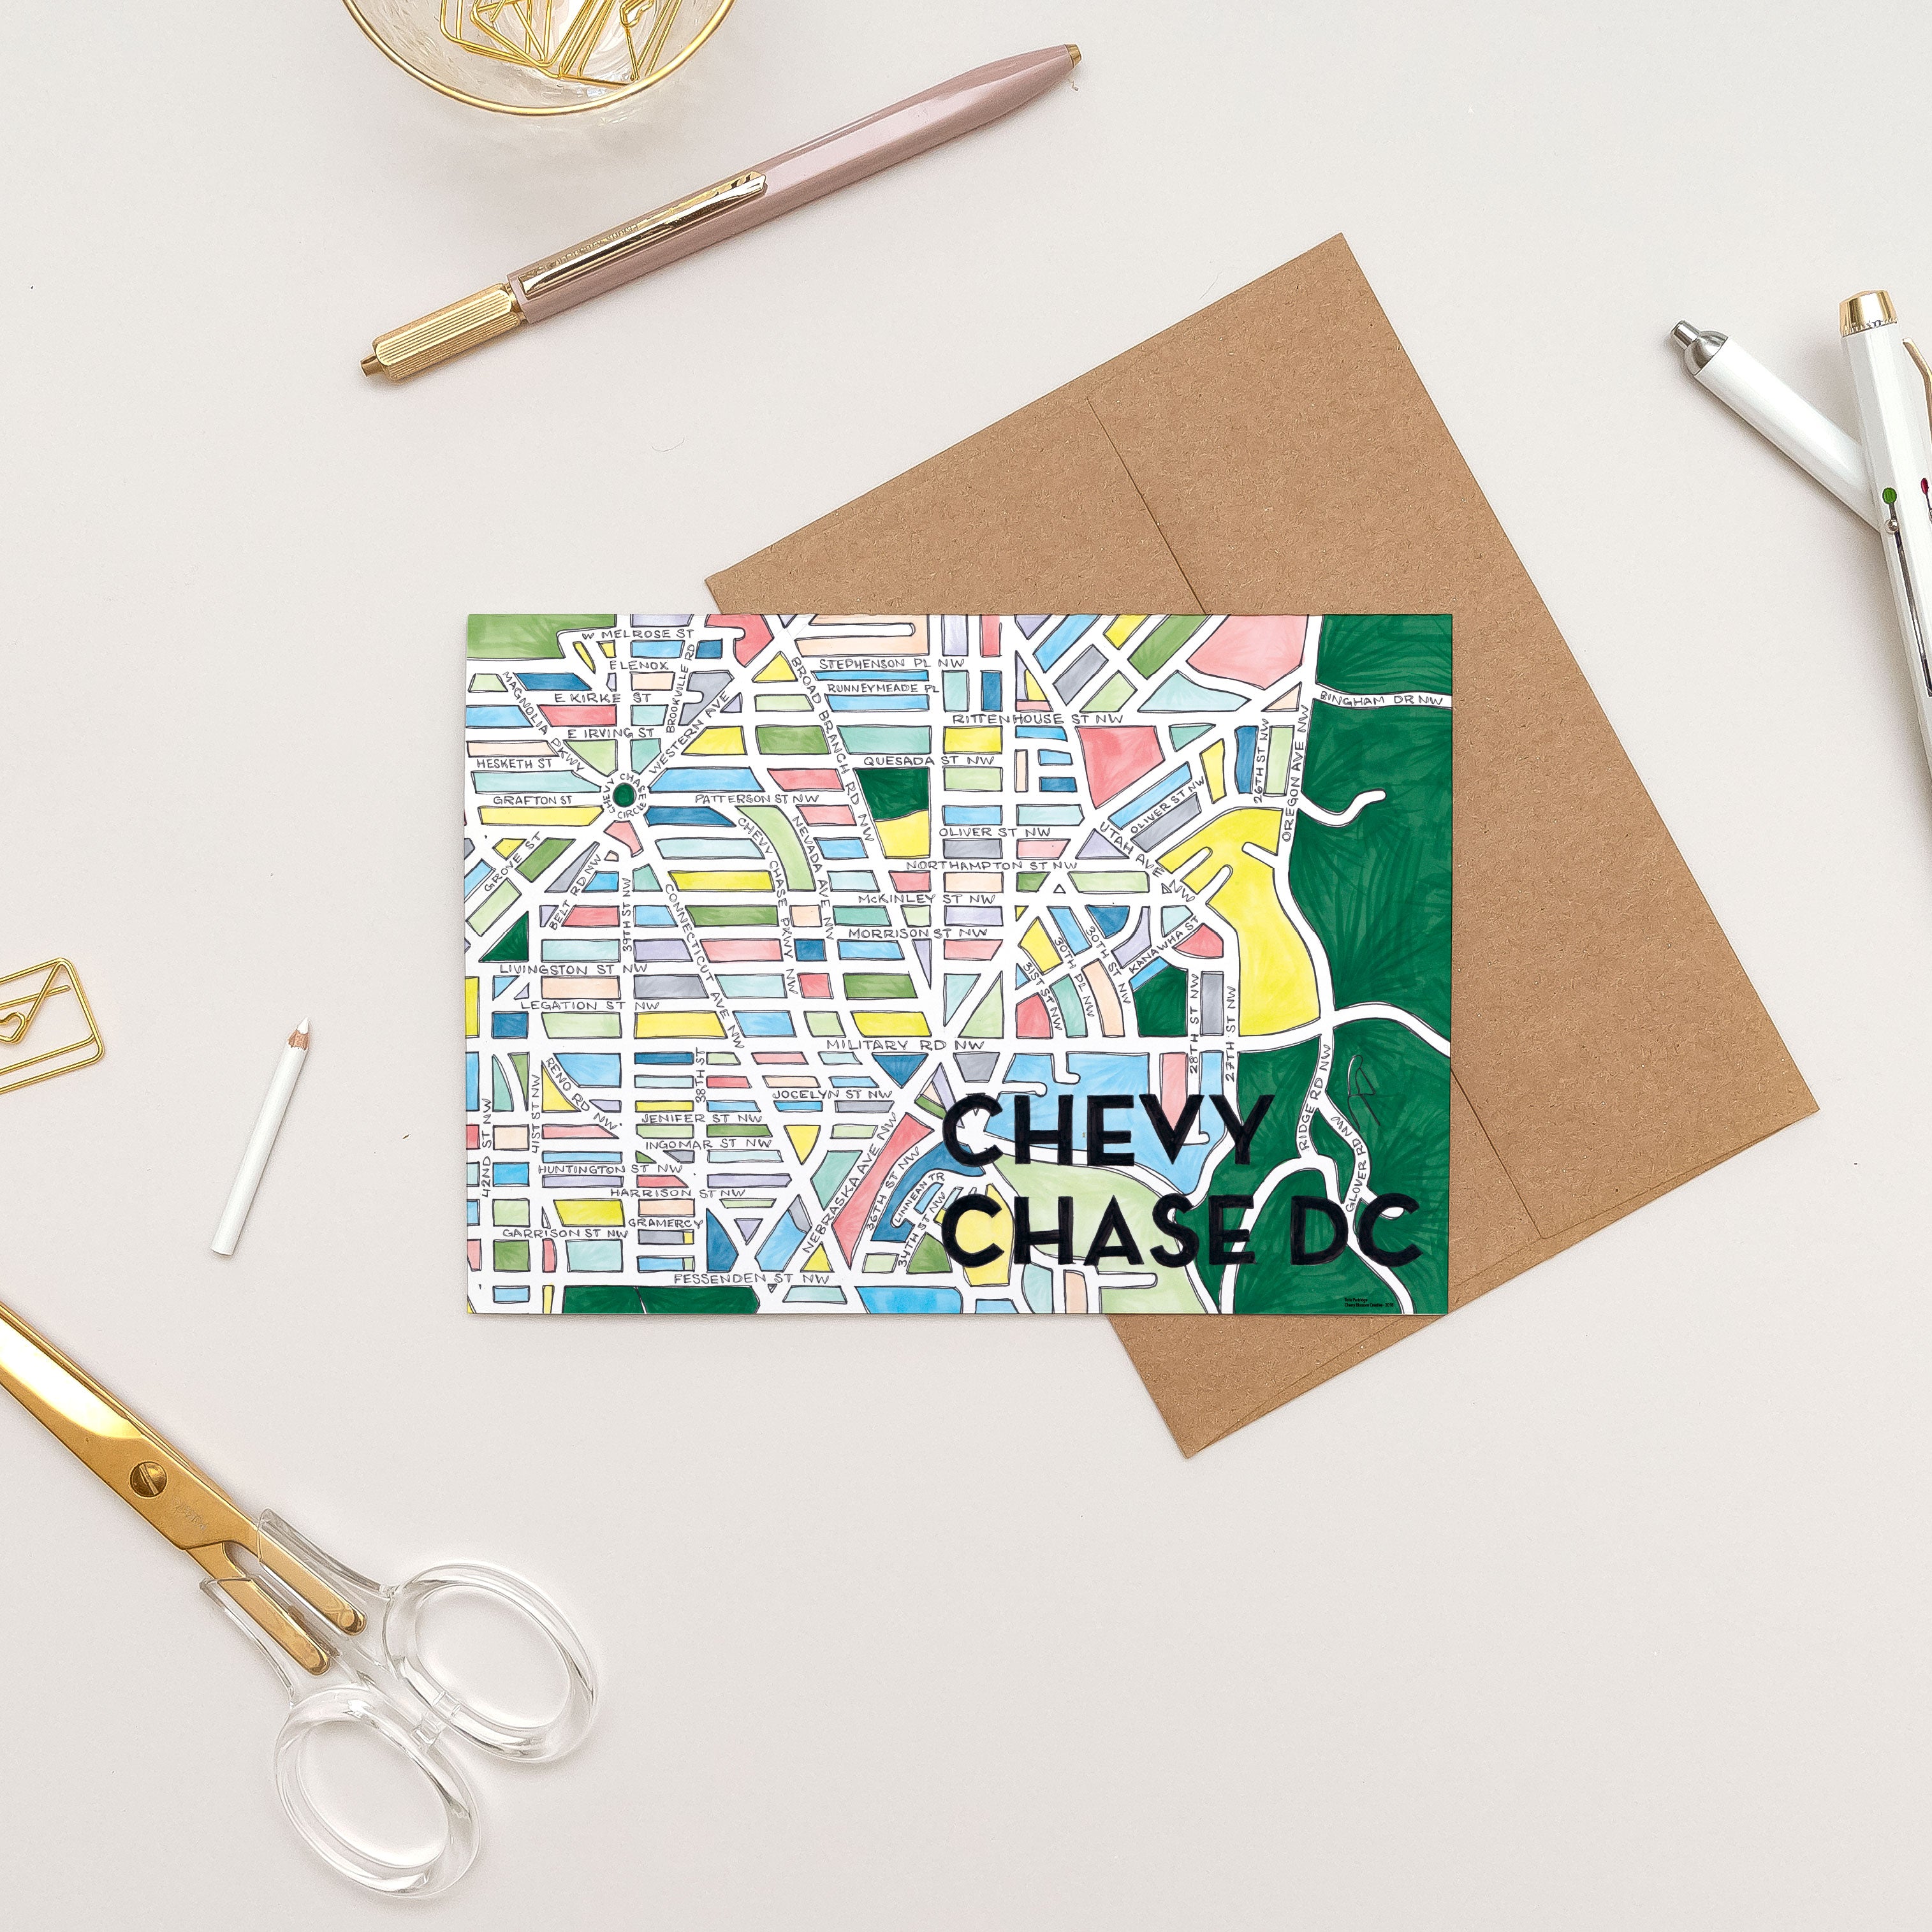 Chevy Chase DC Greeting Card